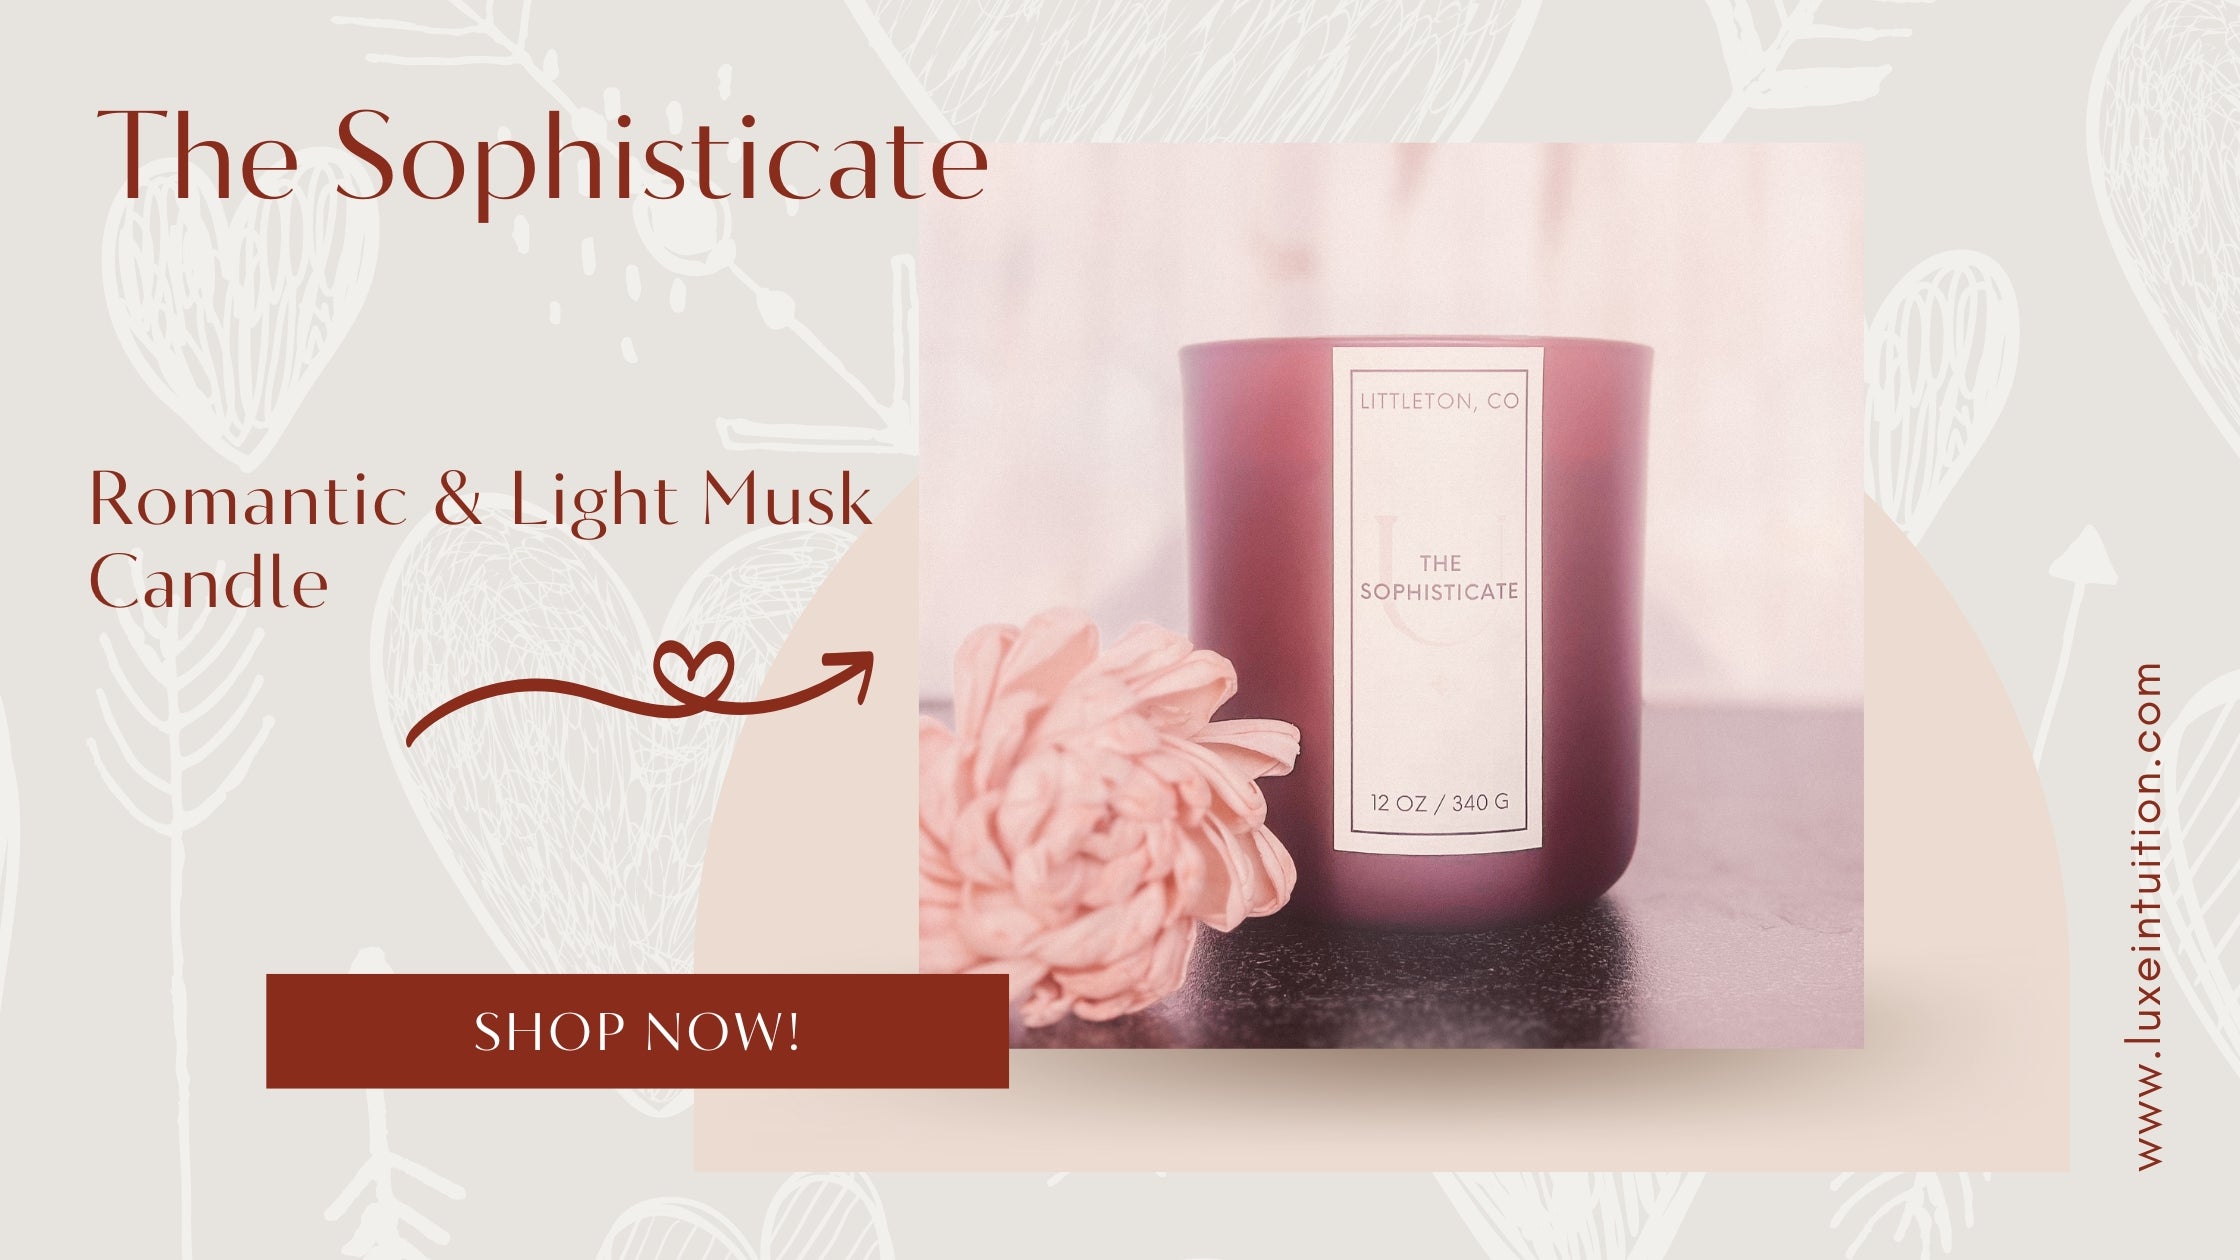 The Sophisticate Candle - A romantic & light musk scented candle in a wine colored glass candle vessel.